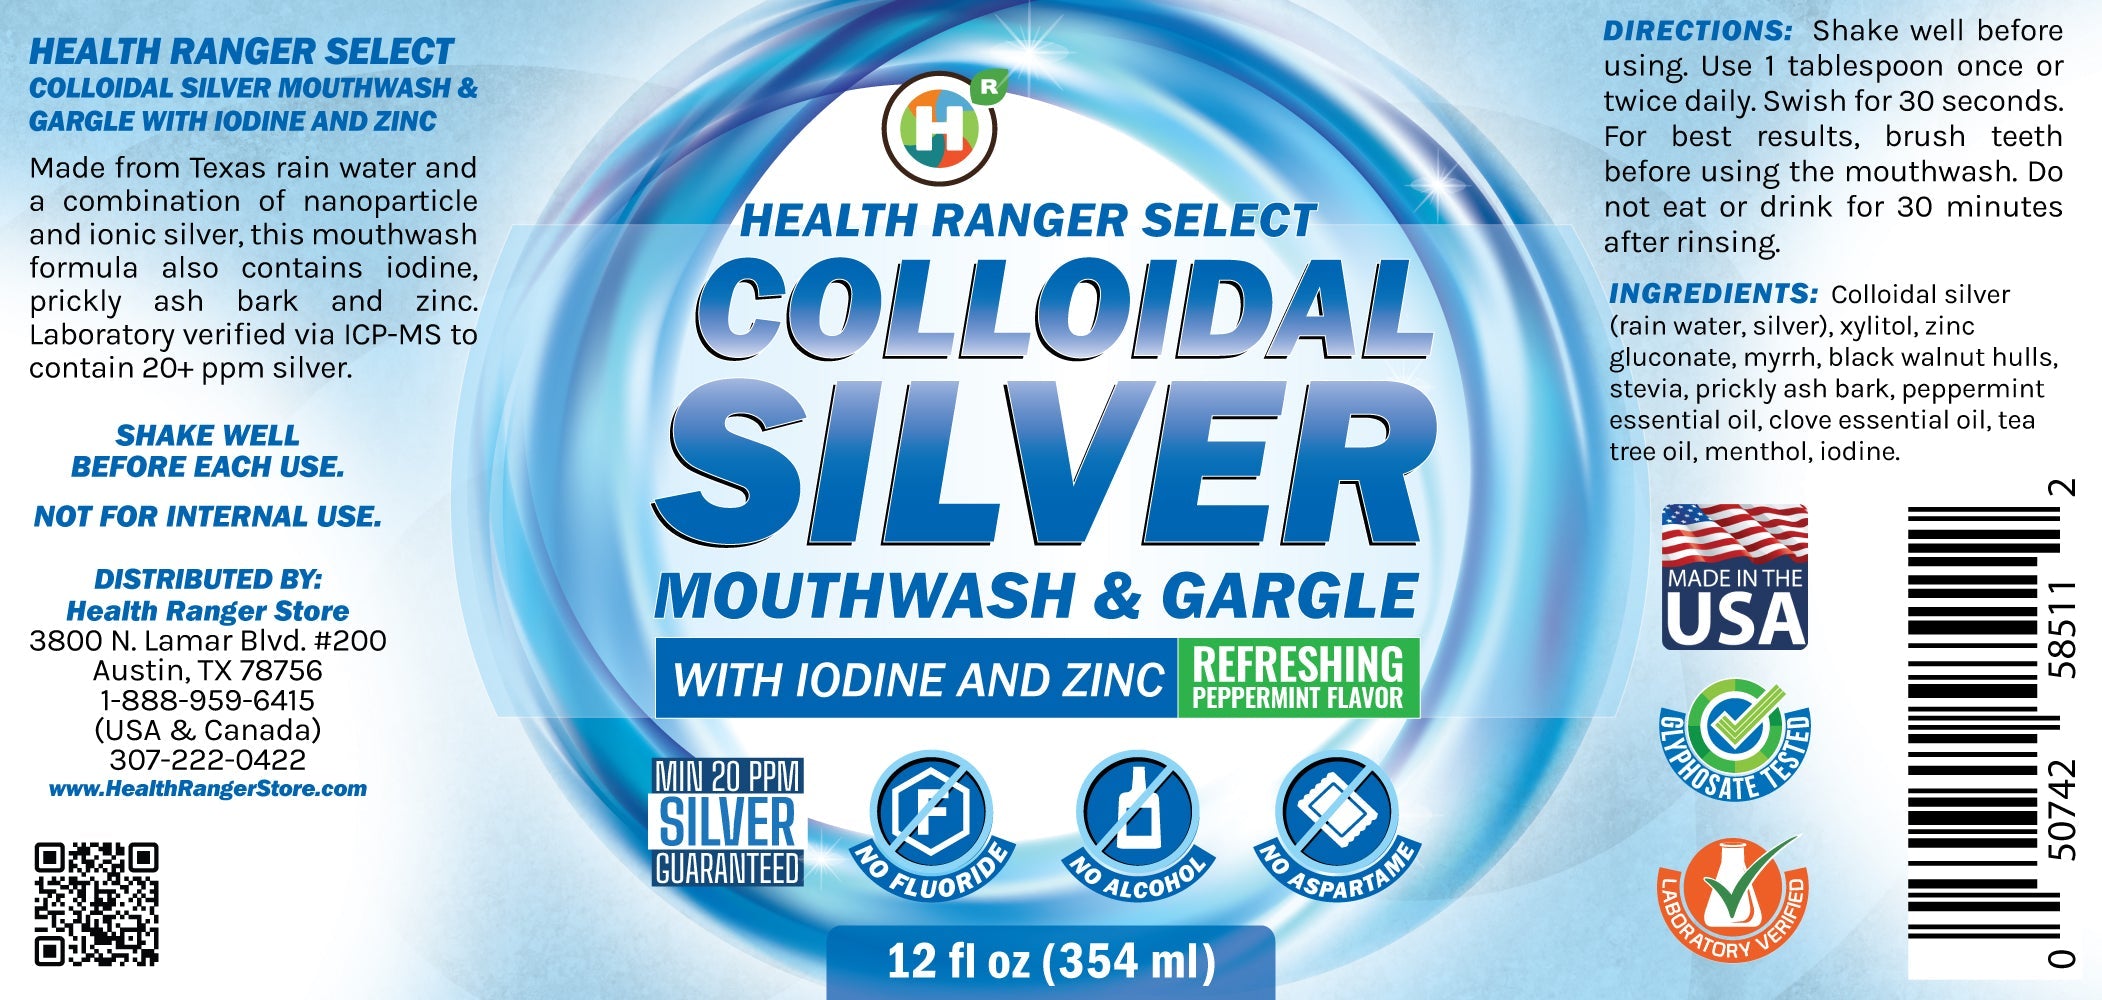 Colloidal Silver Mouthwash &amp; Gargle (with Iodine and Zinc) 12oz (354ml) (3-Pack)